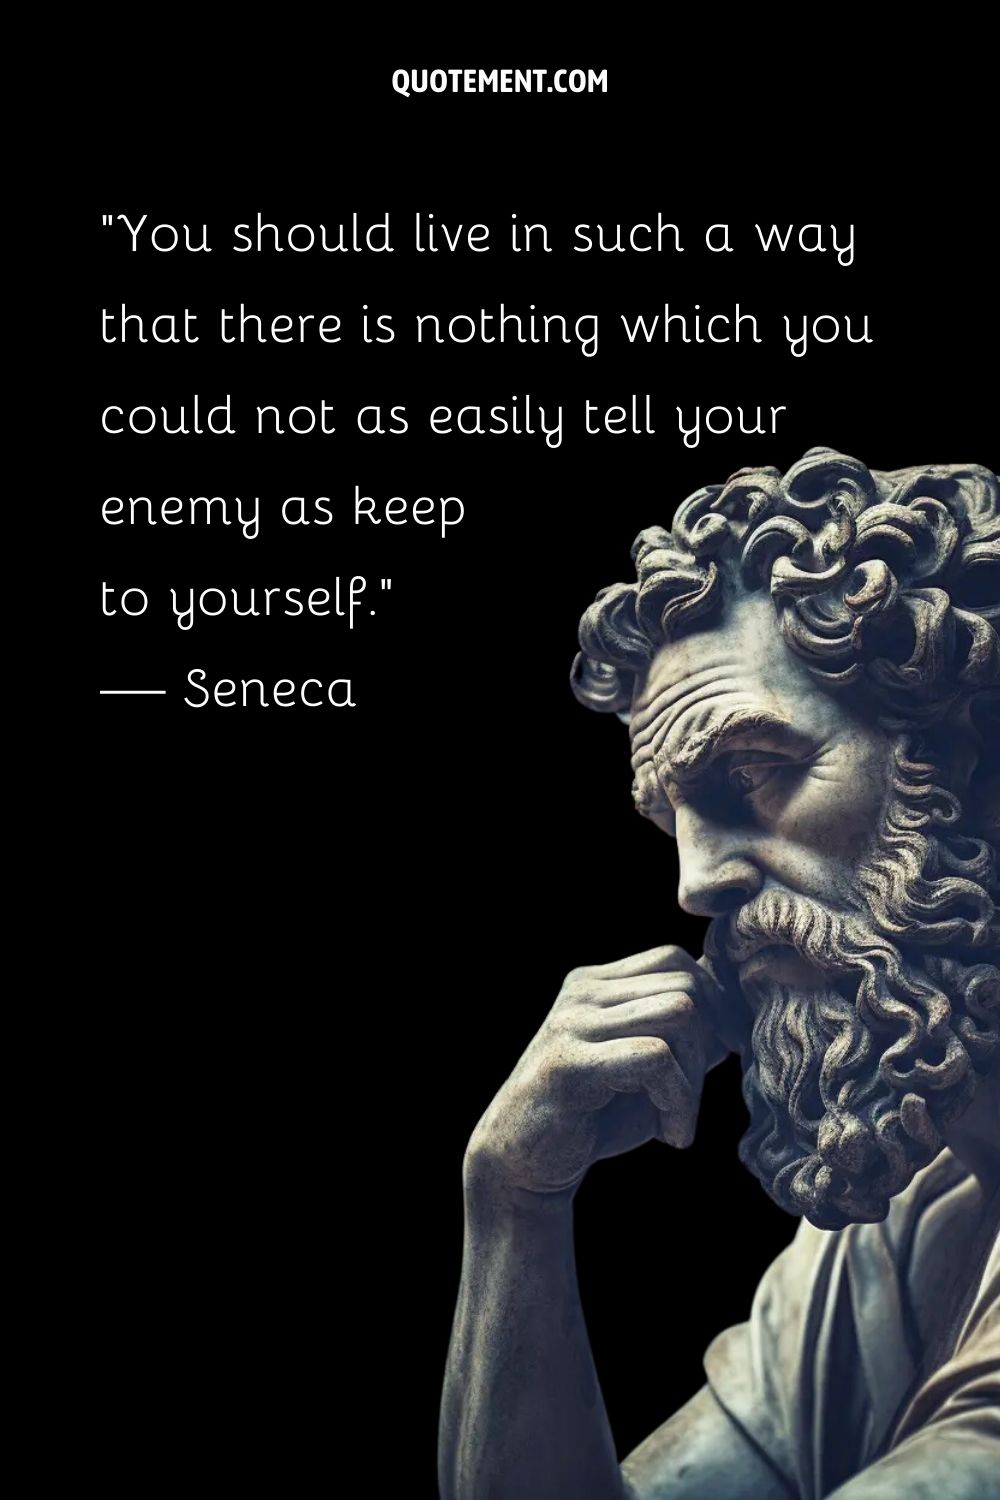 “You should live in such a way that there is nothing which you could not as easily tell your enemy as keep to yourself.” — Seneca